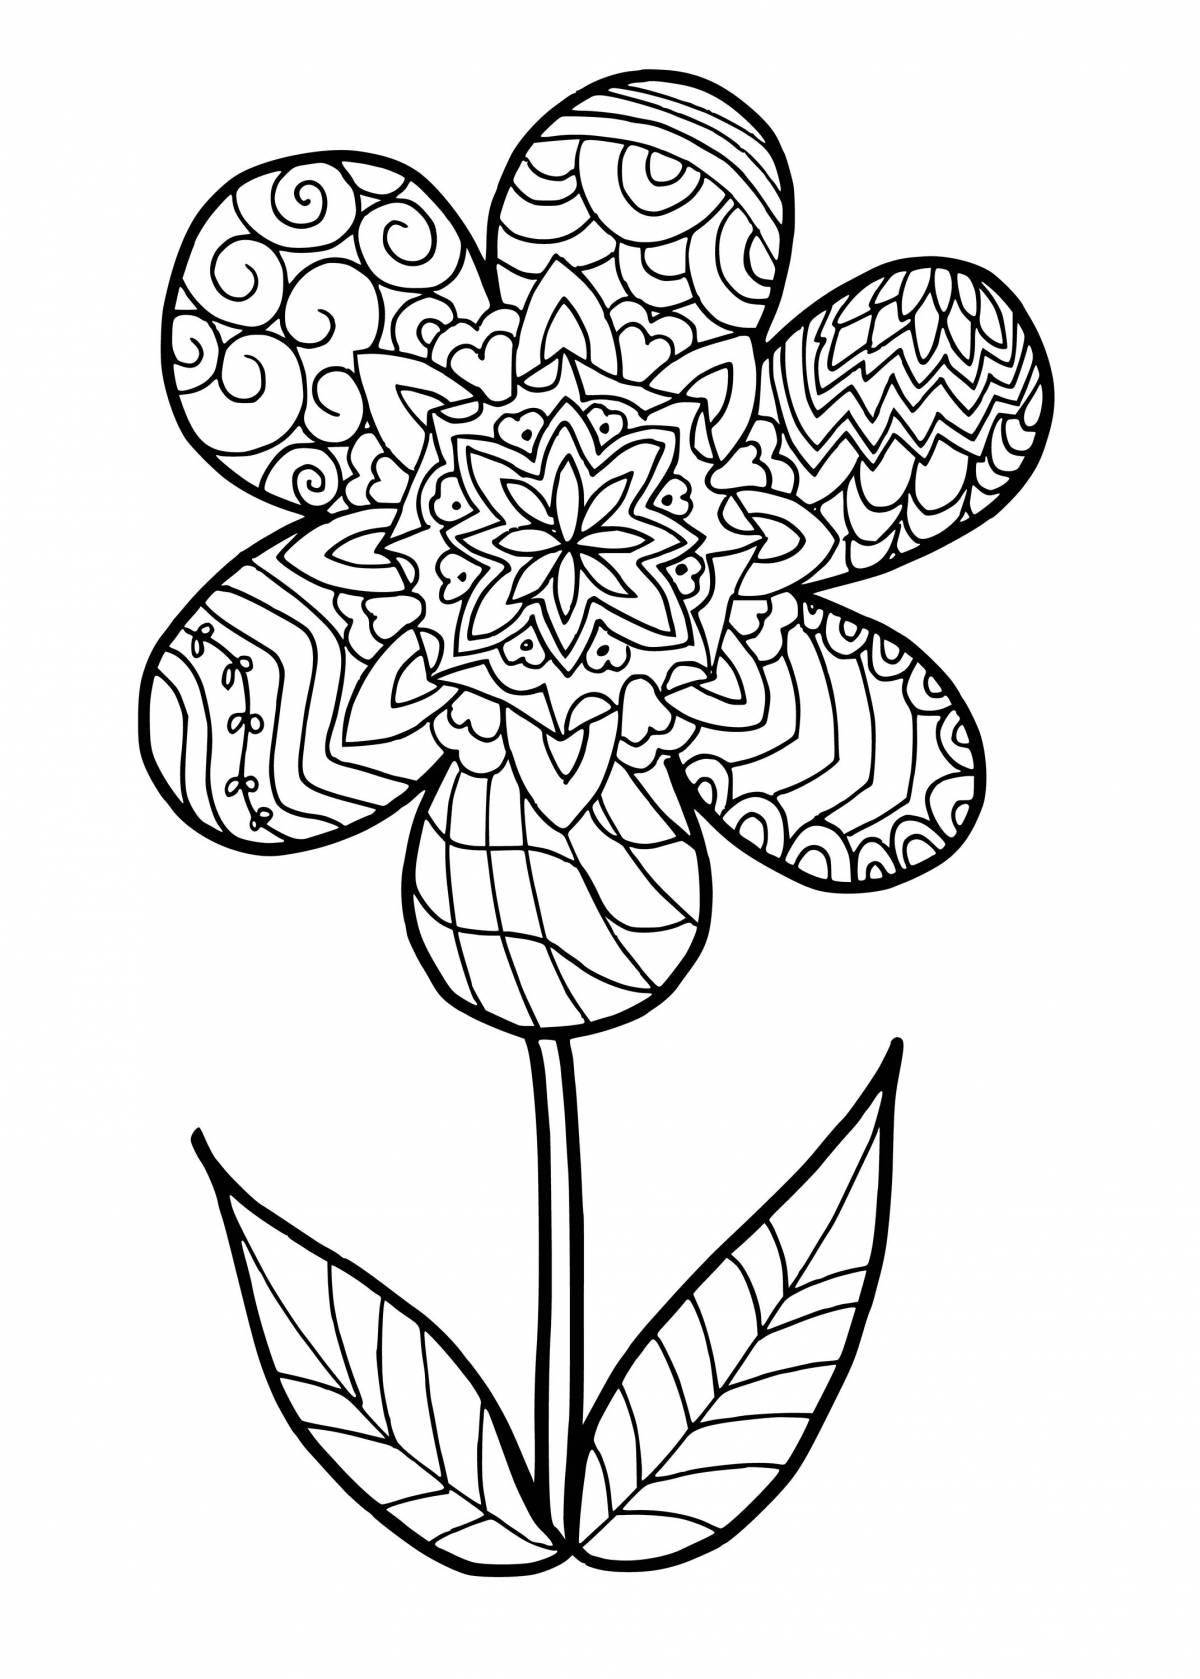 Amazing flower coloring book